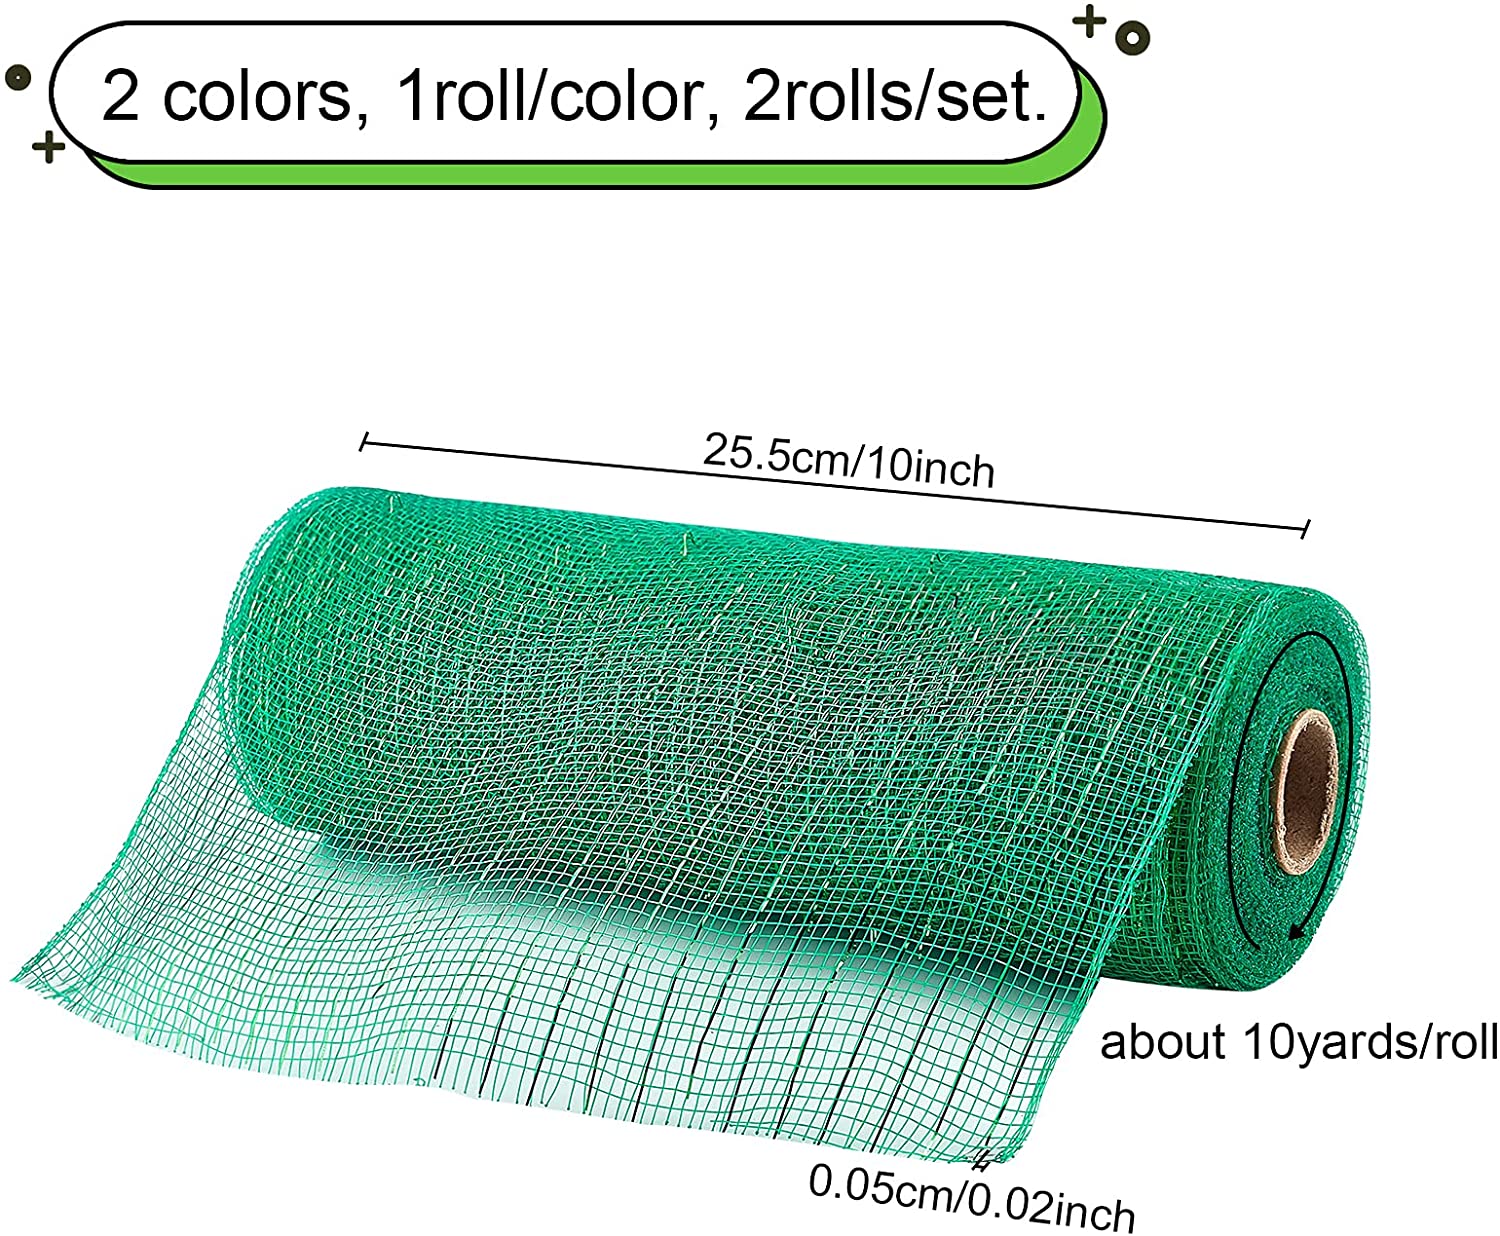 10 Inch x 30 Feet Metallic Mesh Ribbon 2 Rolls Metallic Poly Tulle Roll for Winter Christmas Wreath Decoration, Dark Red and Green